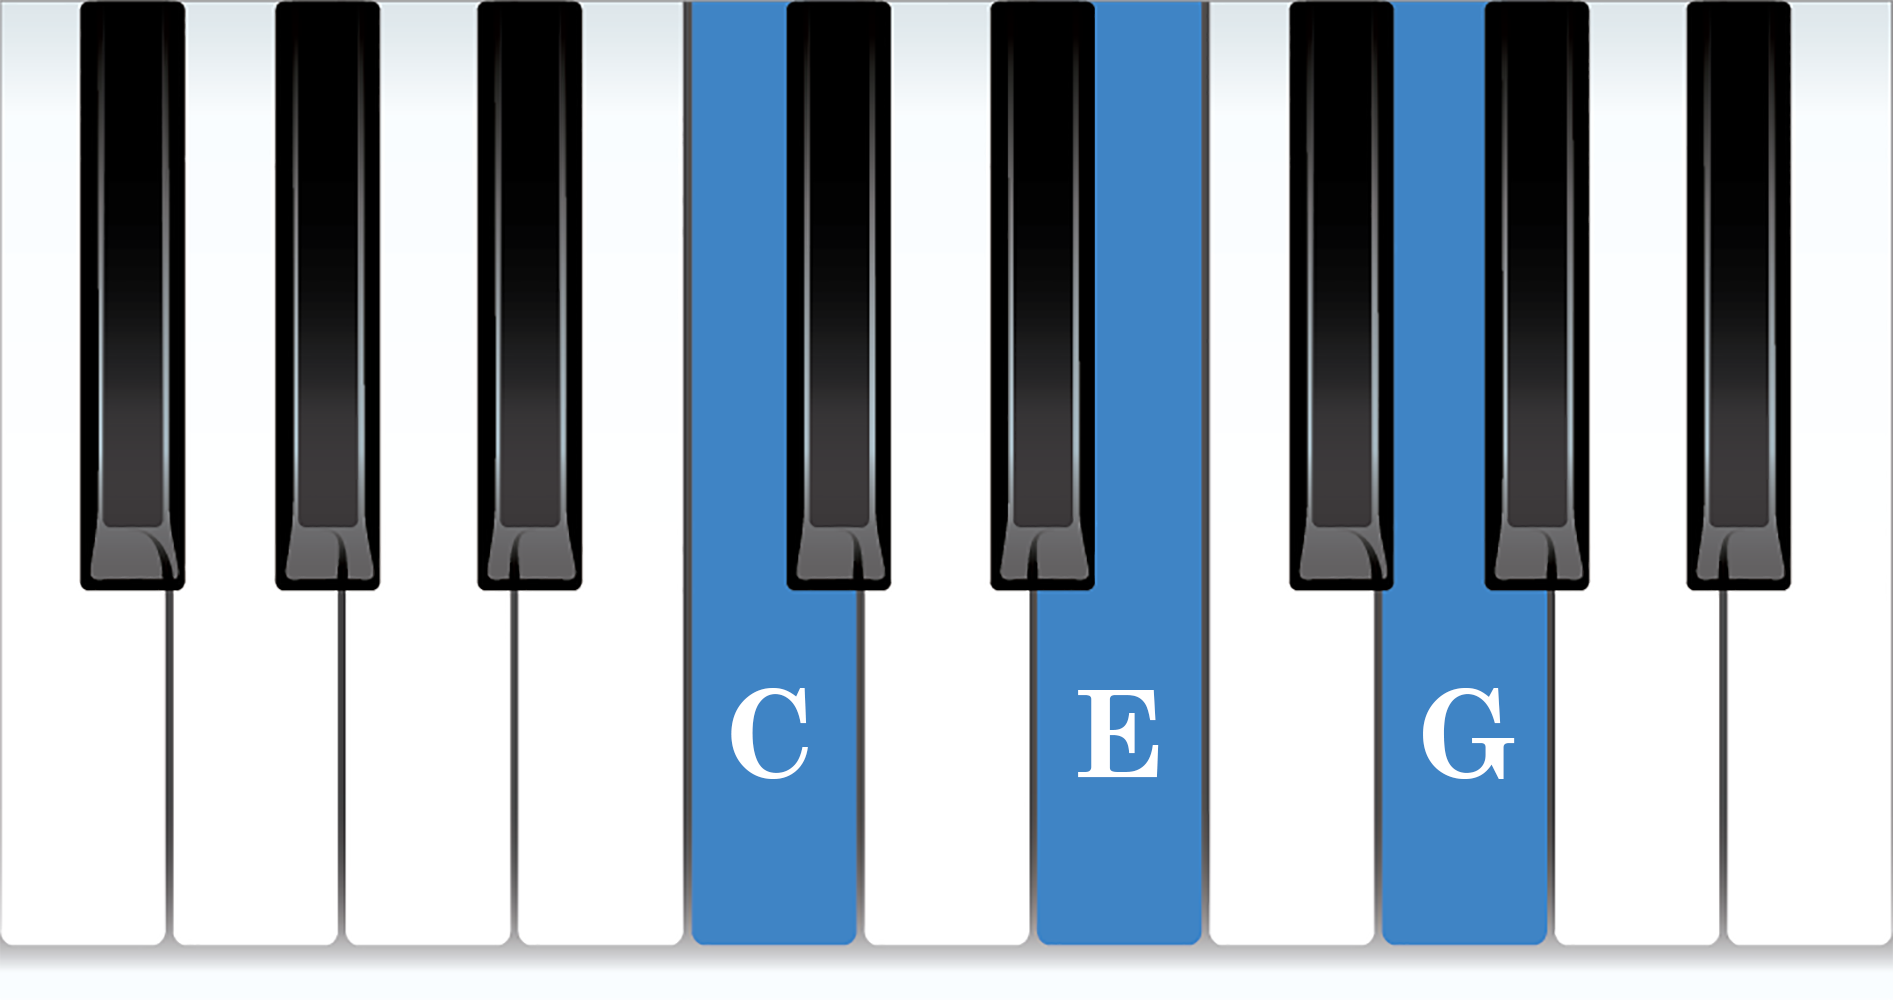 how to play c chord on piano